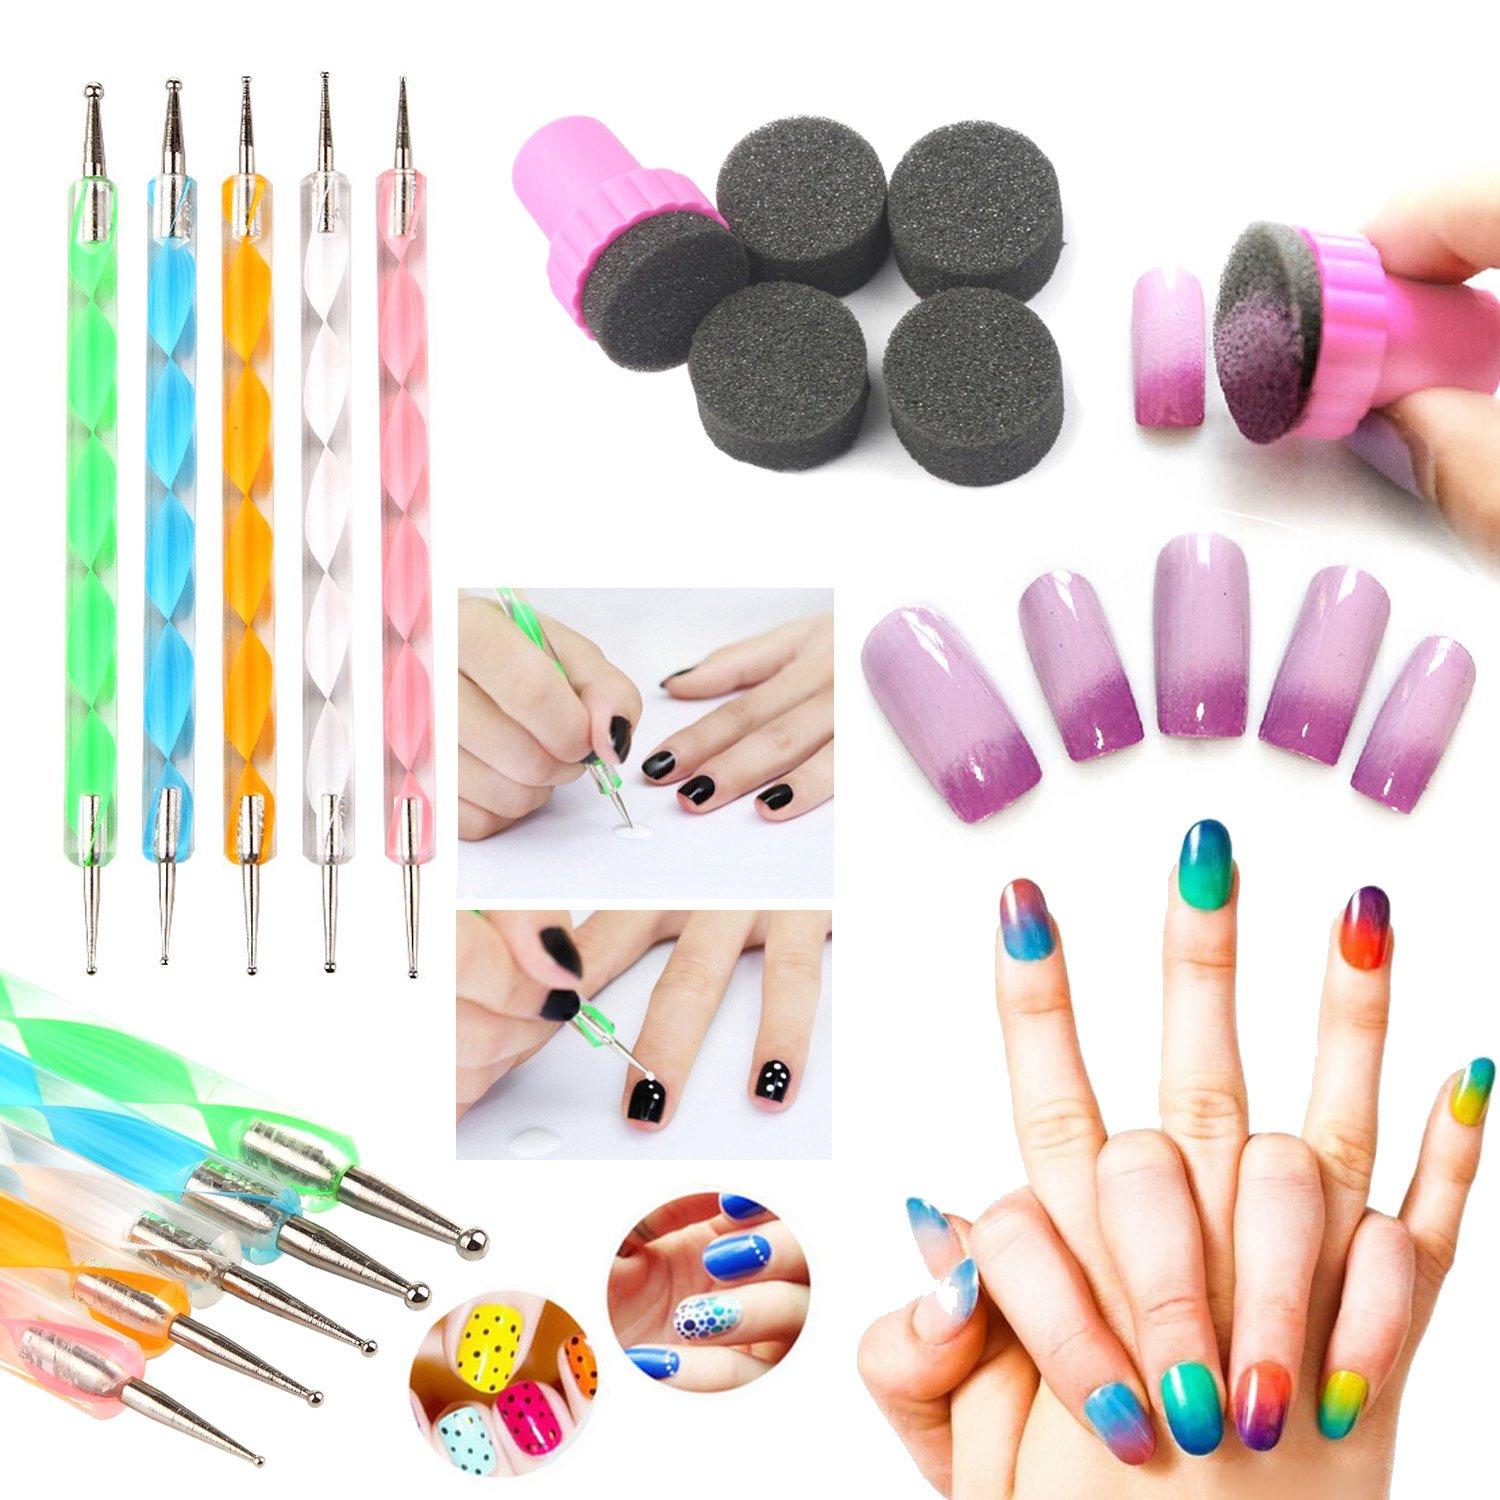 Silicone Polishing Drill Bit Set For Nail Art 3/32 Rotary Burr Manicure  Accessories For Dental & Pedicures Polishing Prud22 From Prudencha, $31.03  | DHgate.Com